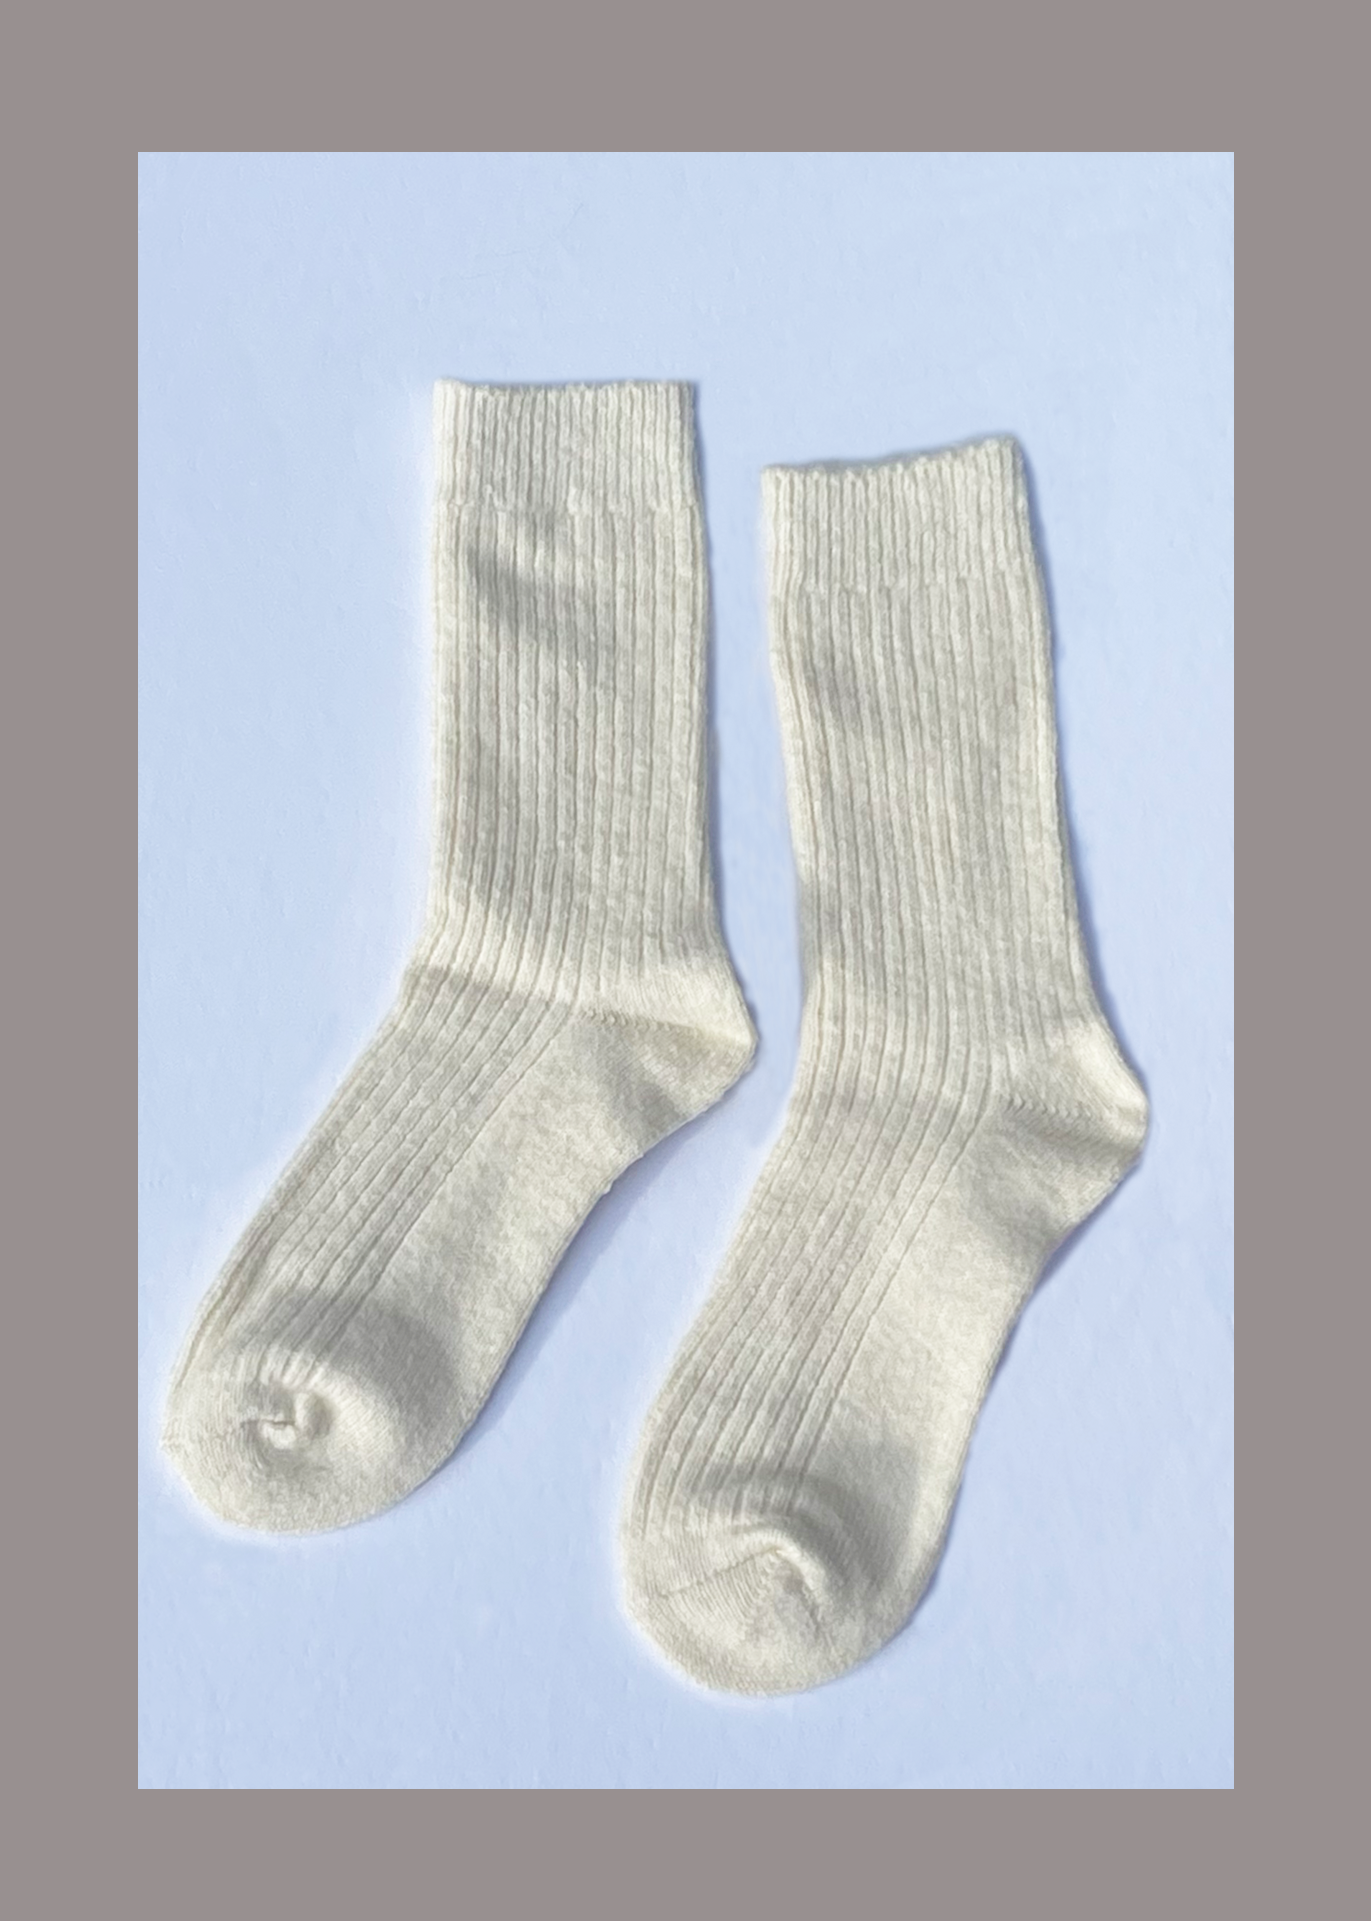 Marshmallow sock. soft white combed cotton sock.